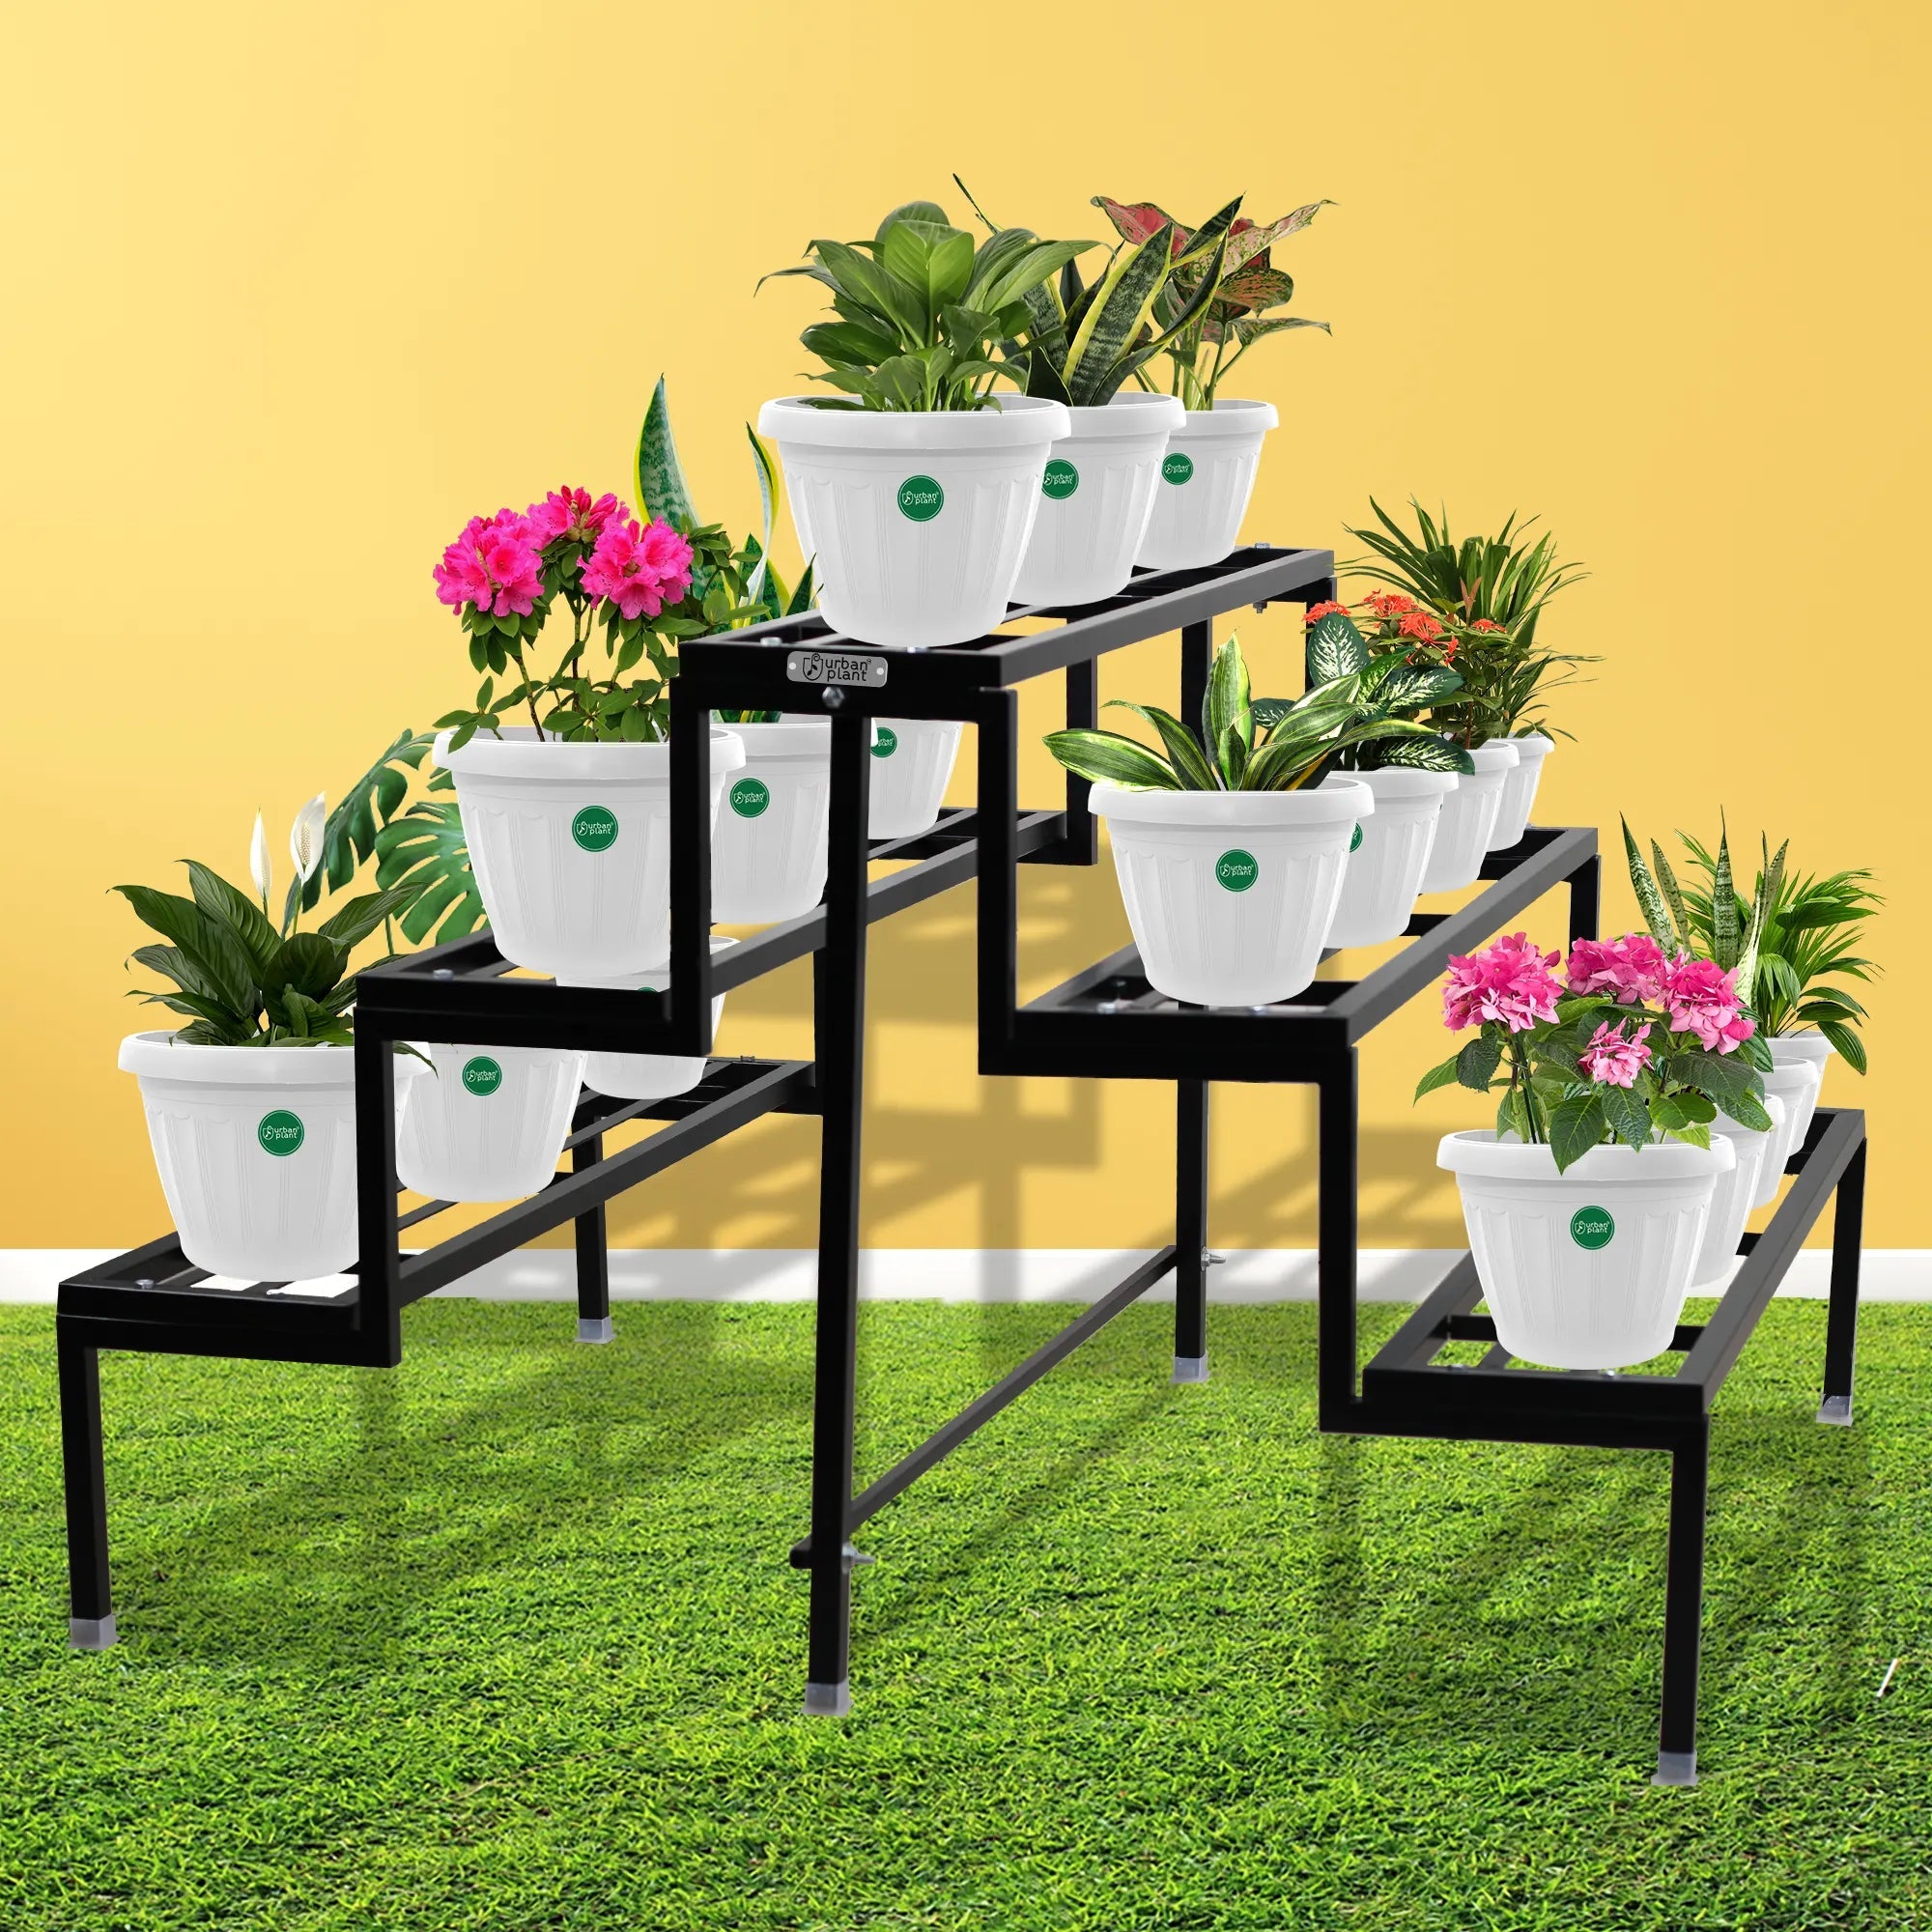 Heavy Duty 5-Step Planter Pot Stand- Best Outdoor & Indoor Garden Stand (Easy Assembly) Planter Stand Urban Plant 